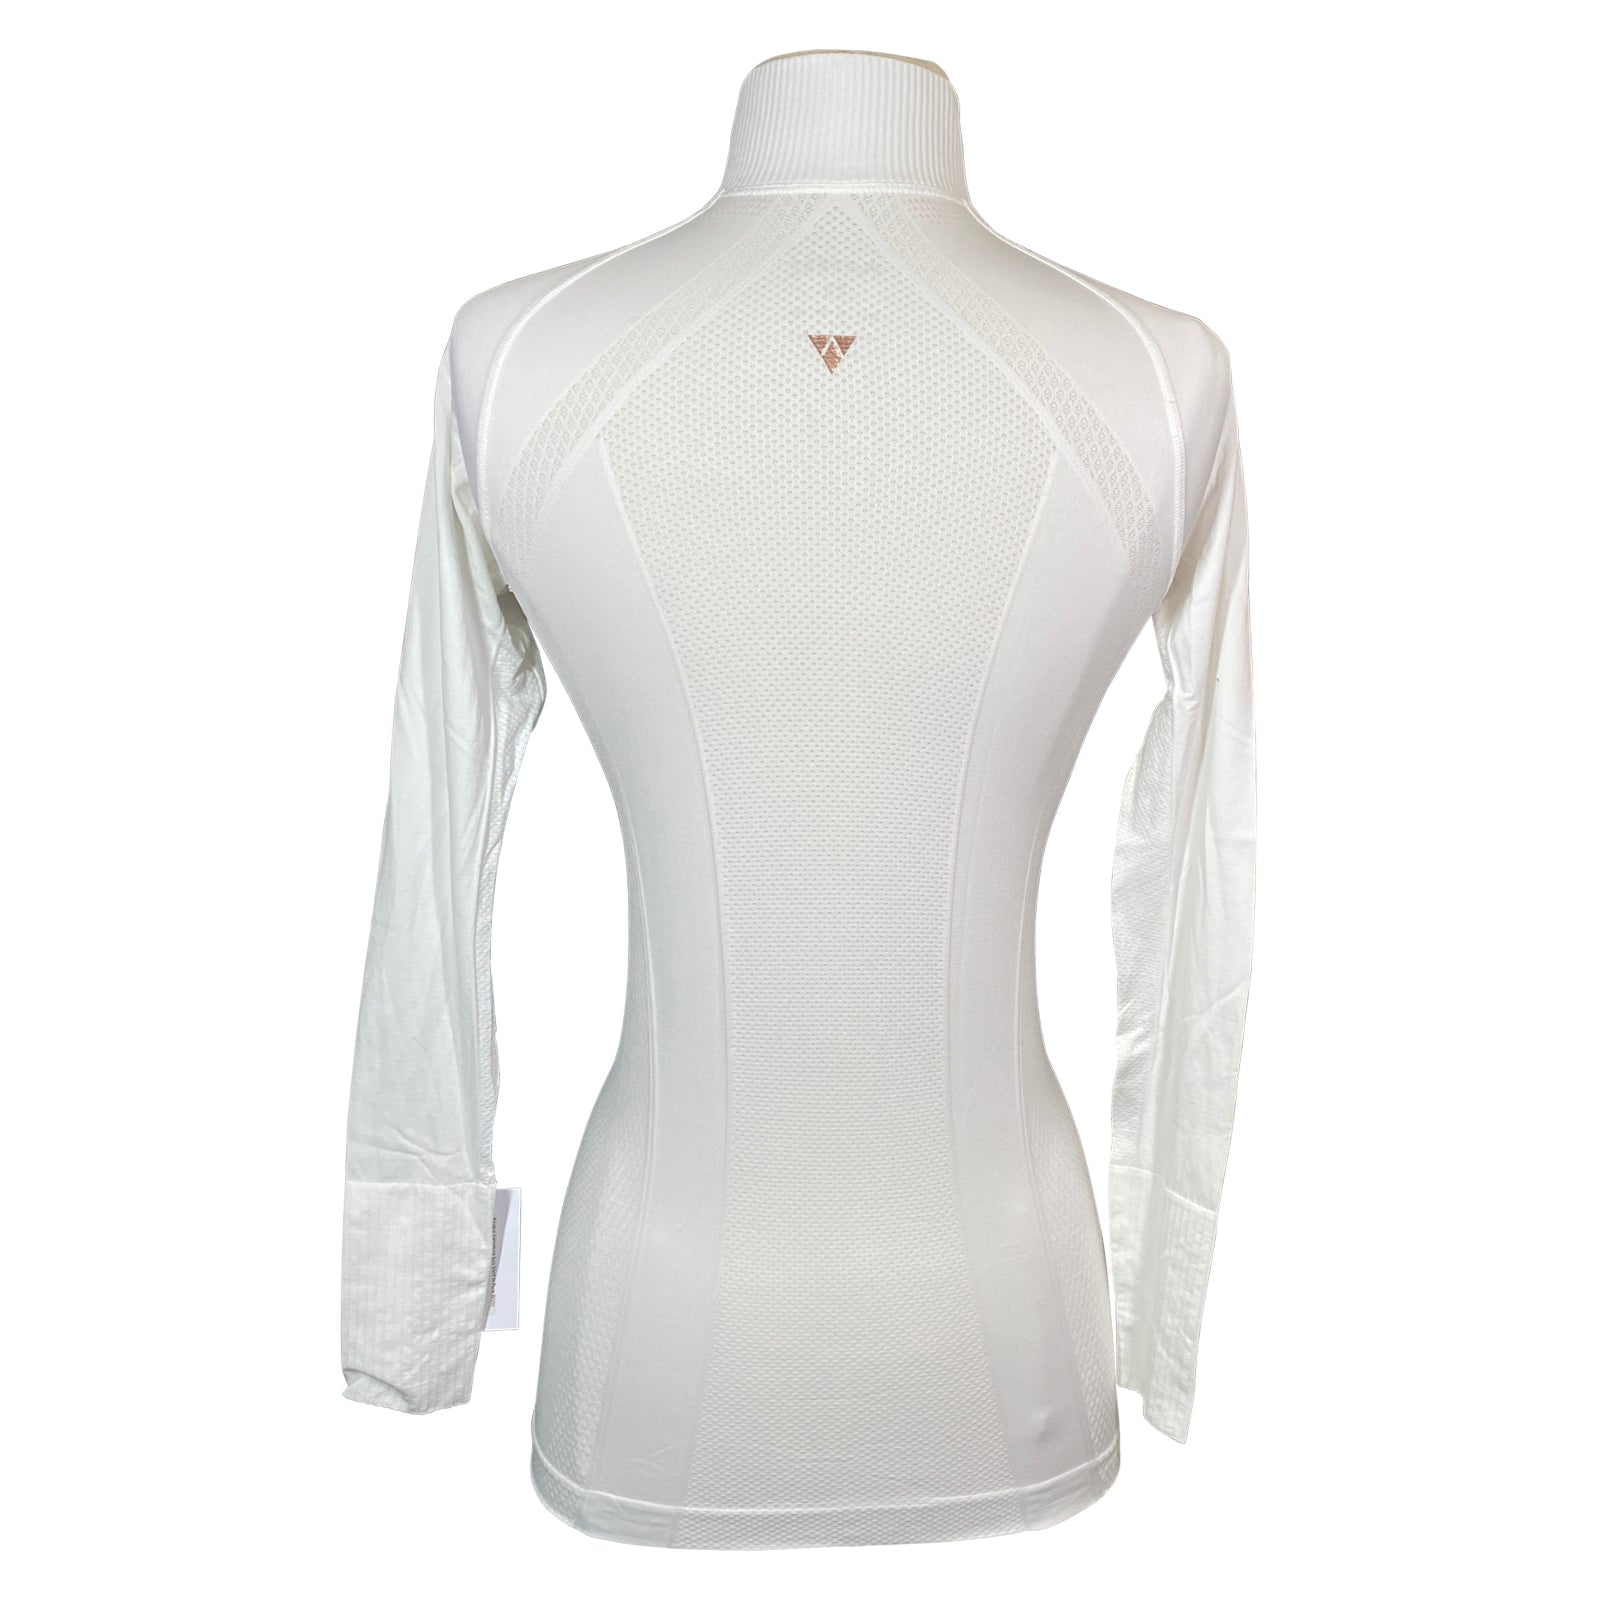 Back of Anique Signature Sunshirt in Pure White